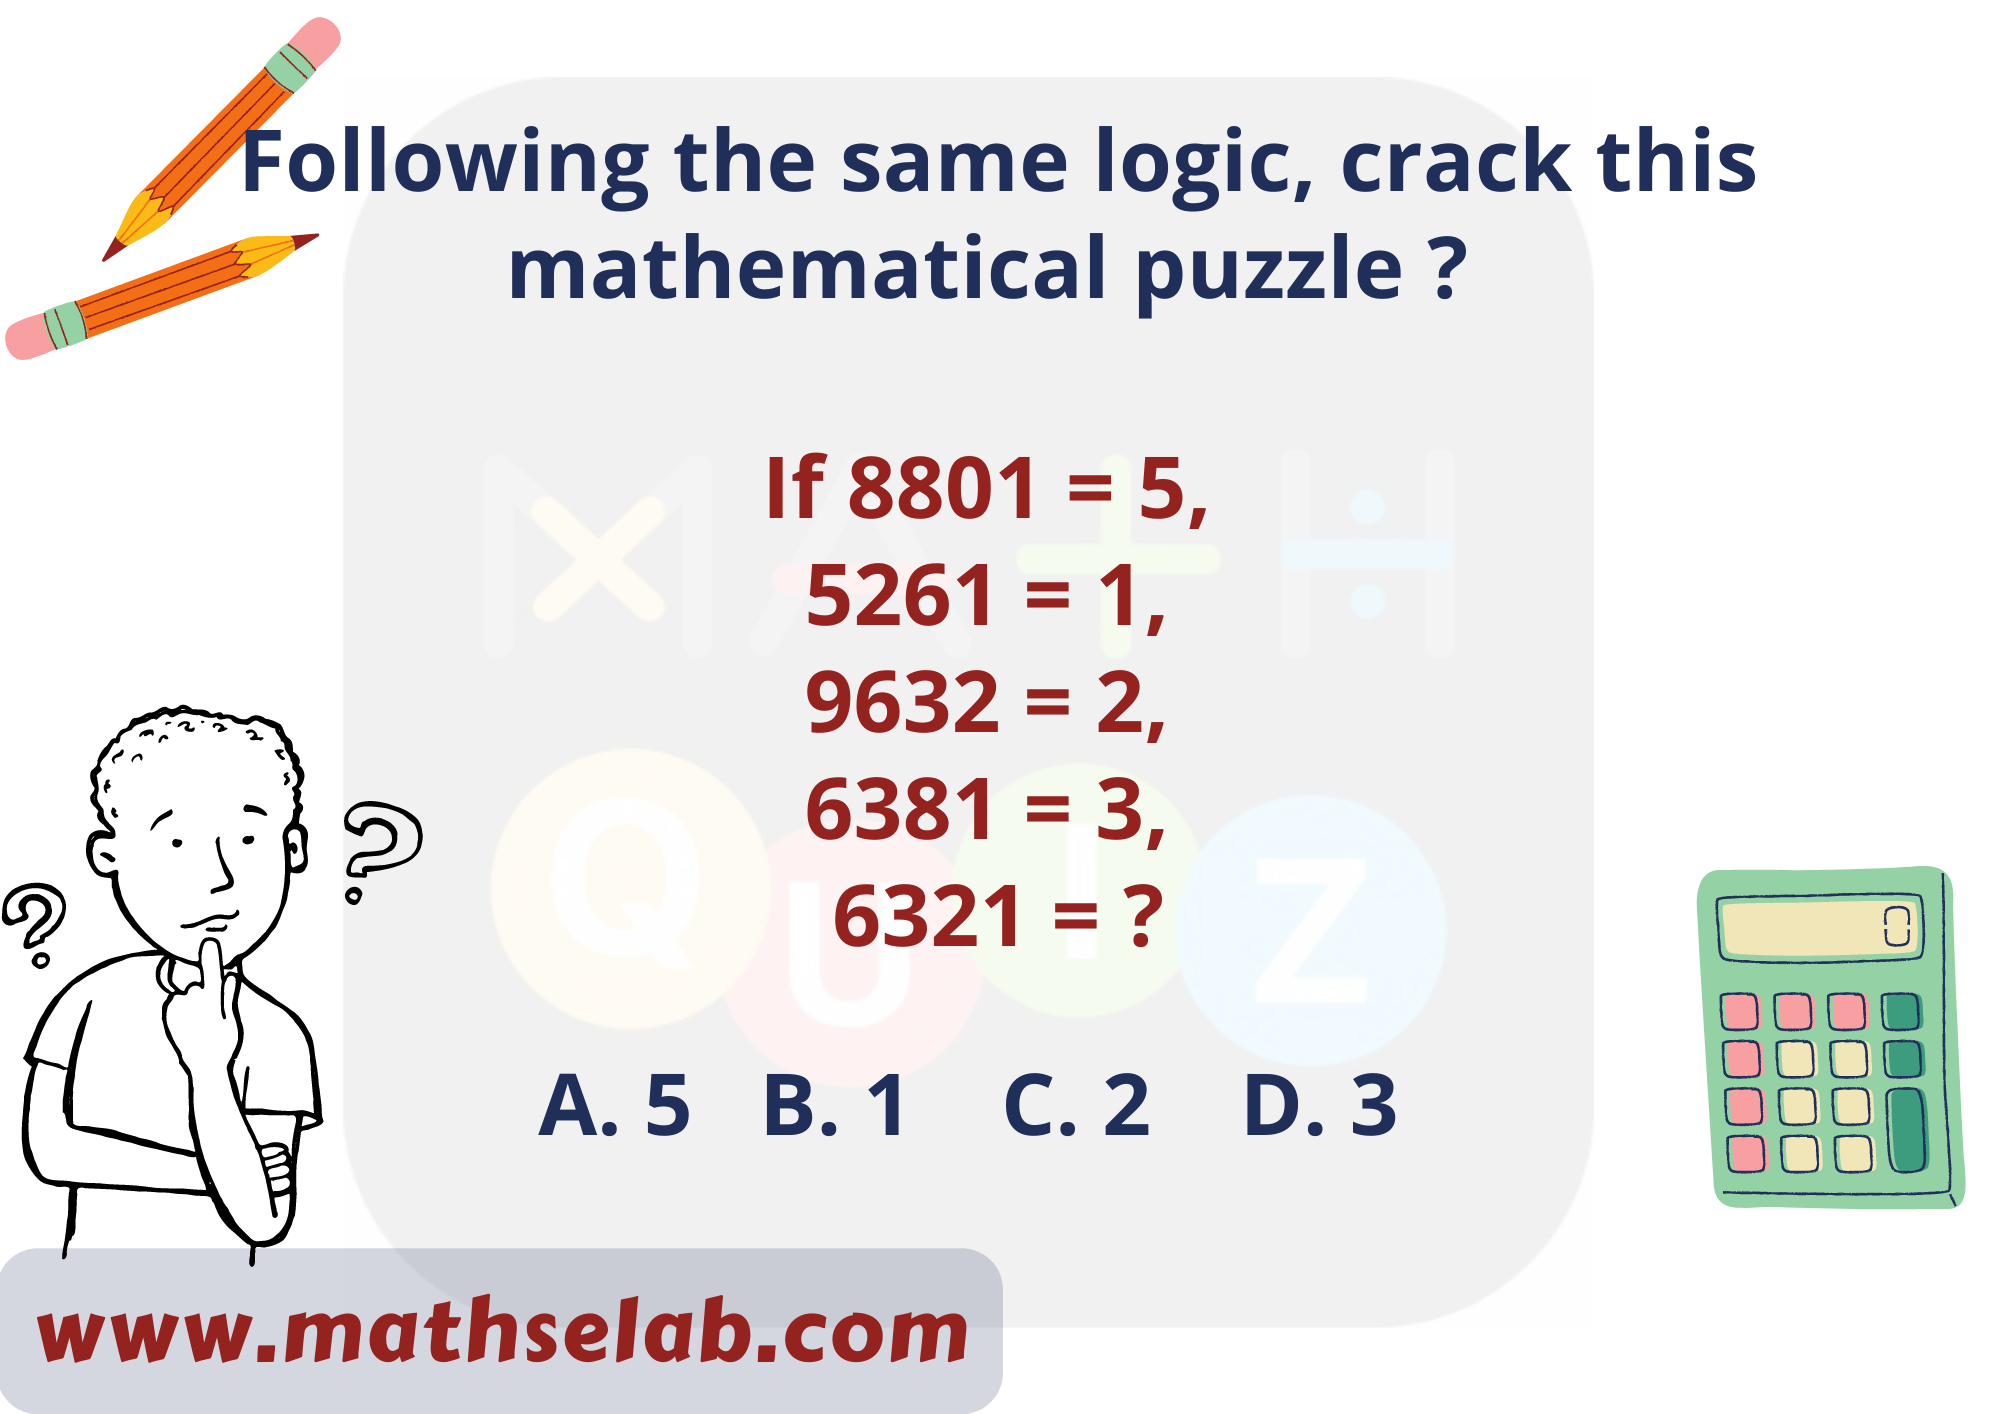 Following the same logic, crack this mathematical puzzle If 8801 = 5, 5261 = 1, 9632 = 2, 6381 = 3, 6321 = - www.mathselab.com